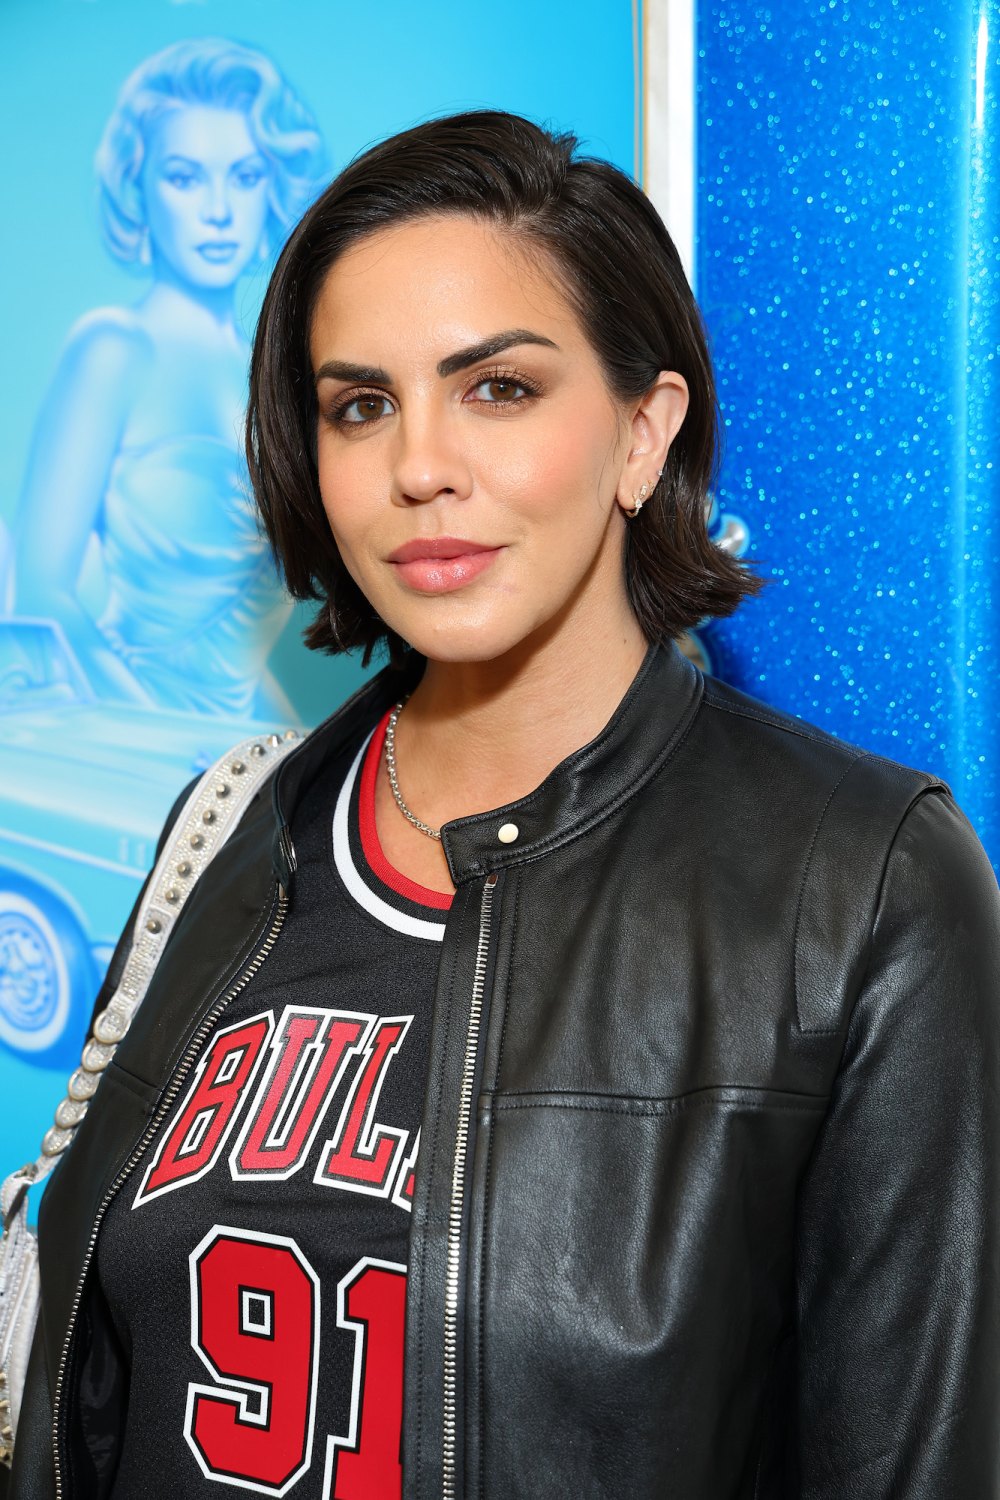 Pump Rules Katie Maloney Doesnt Think Shes Ever Going to See Raquel Leviss Again